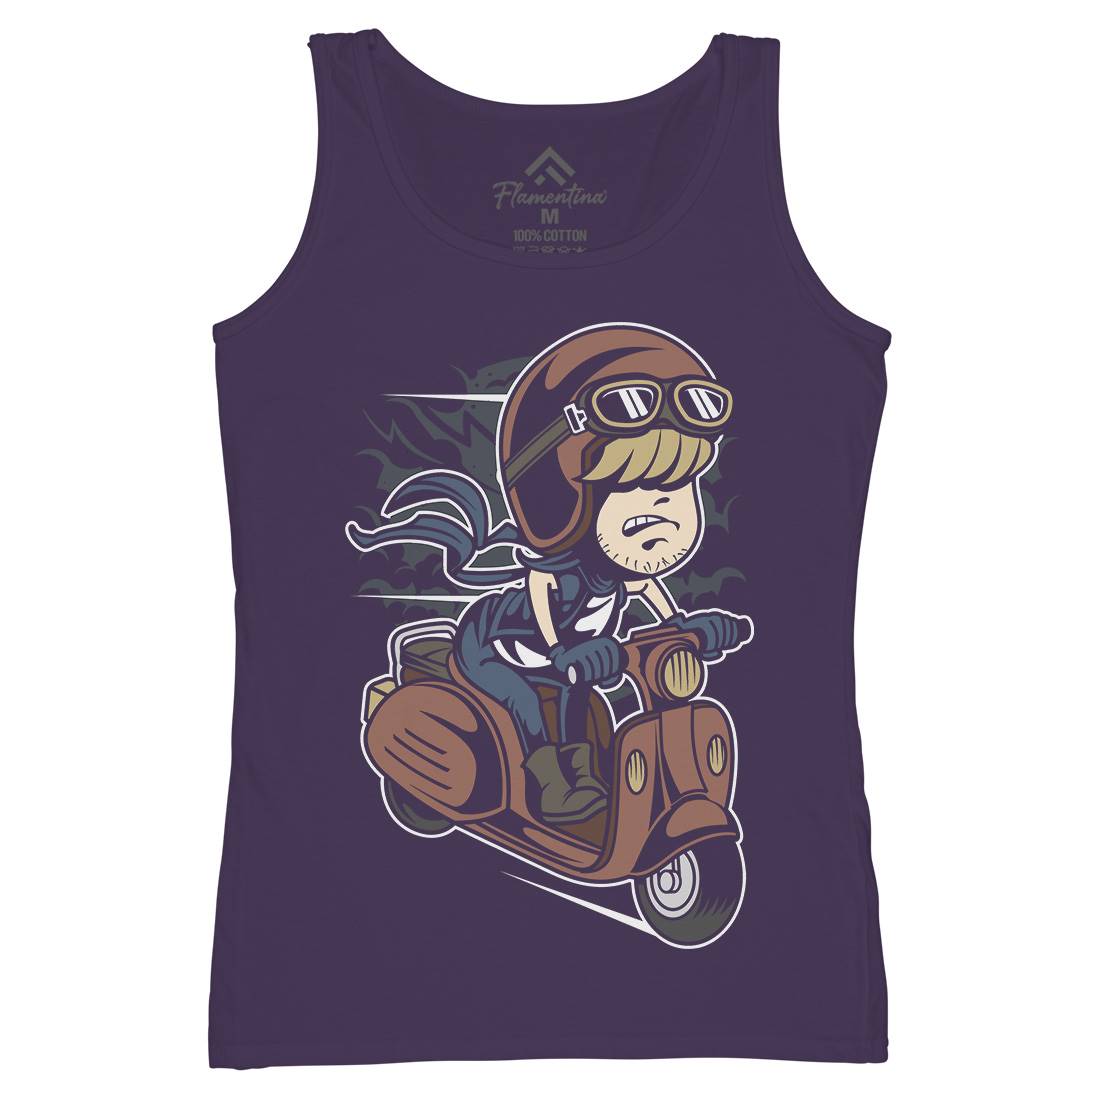 Scooter Rider Kid Womens Organic Tank Top Vest Motorcycles C436